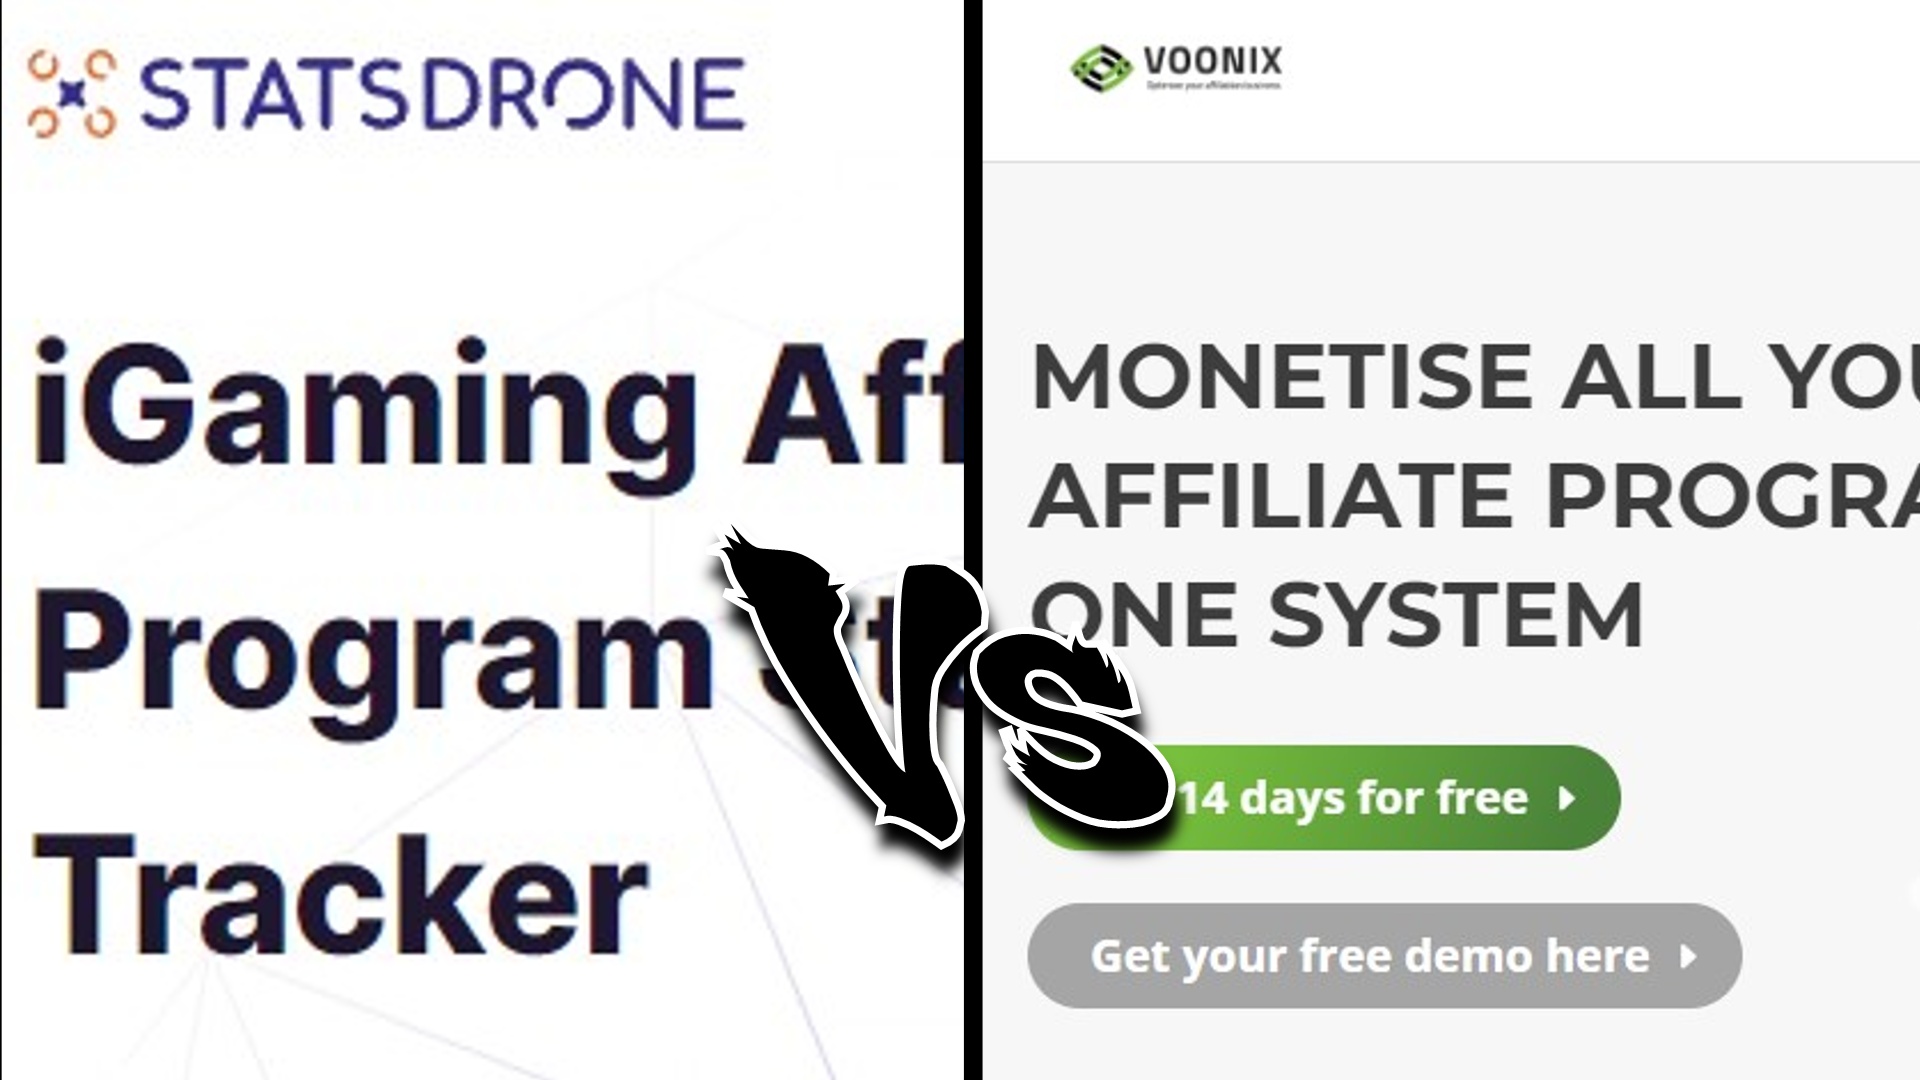 Voonix vs StatsDrone in 2022 - Features, Prices and Differences